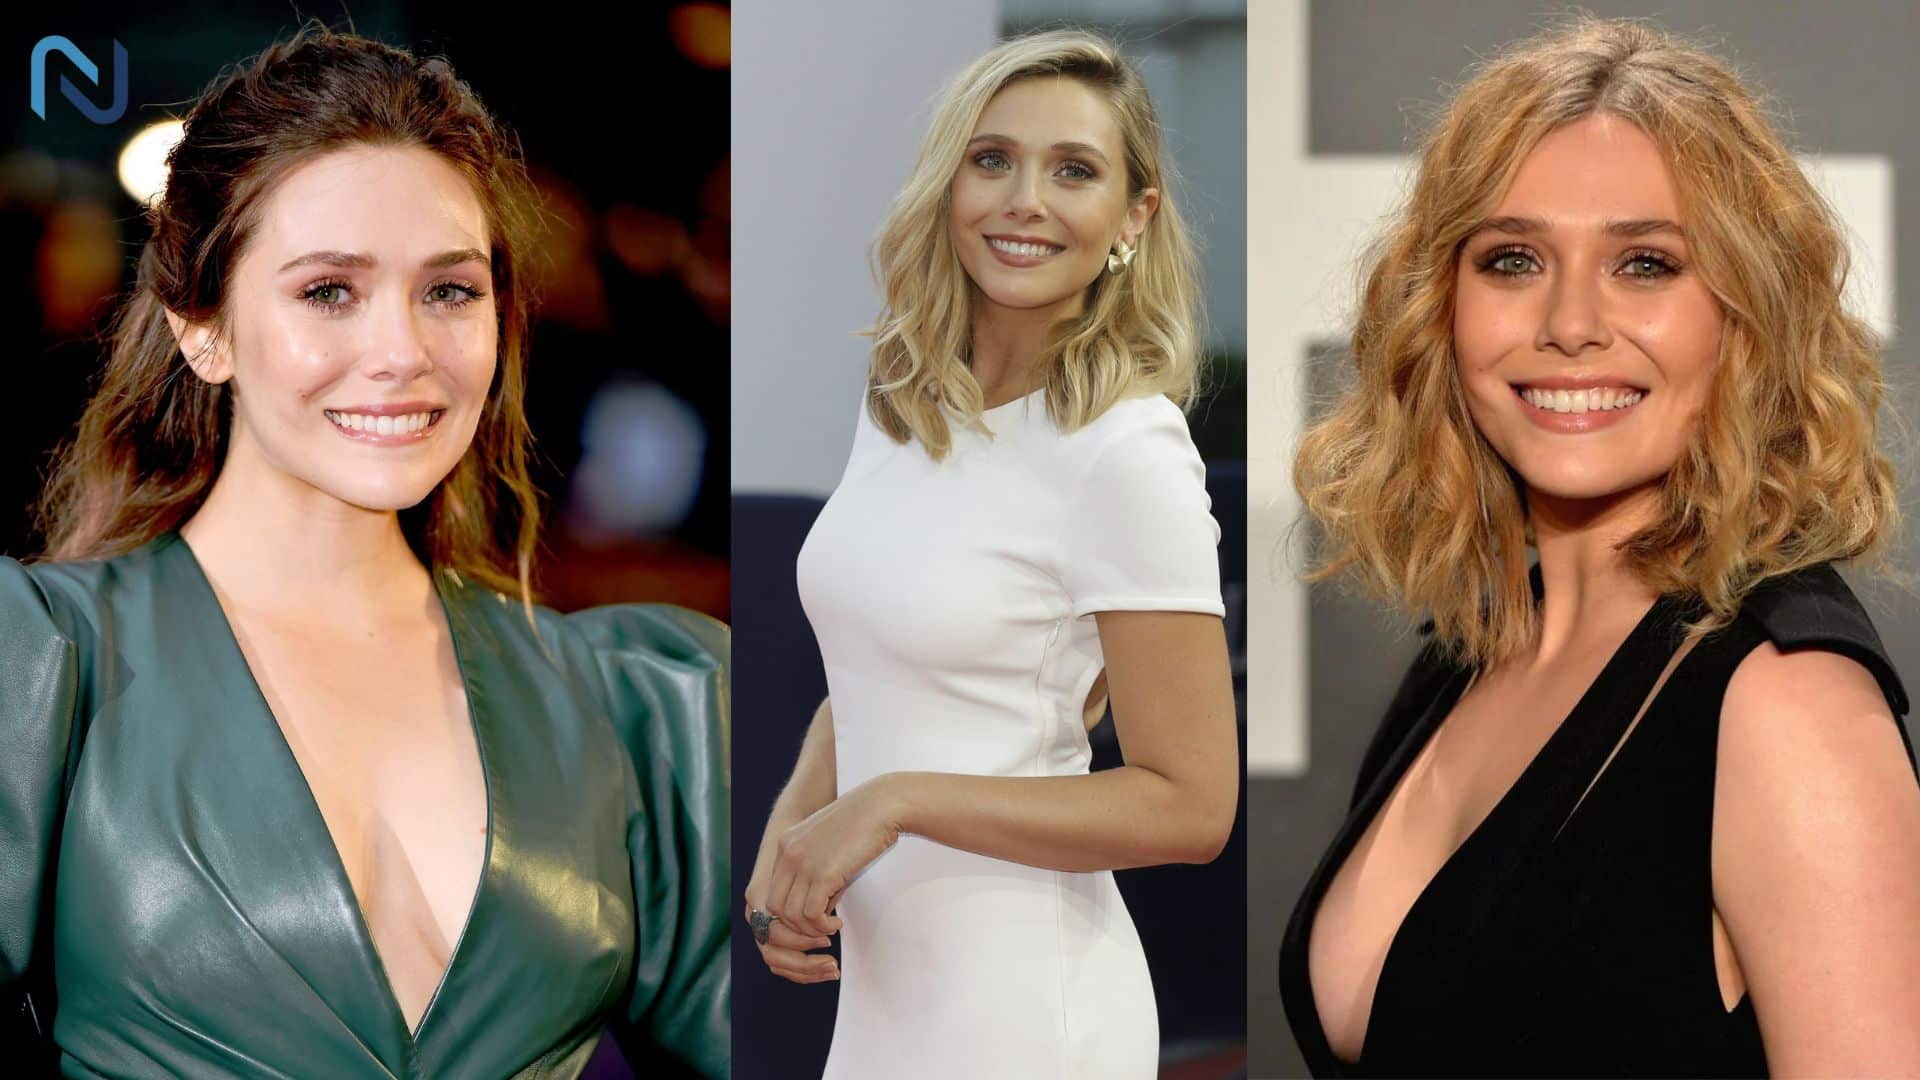 Elizabeth Olsen Hottest and Most Beautiful American Actress